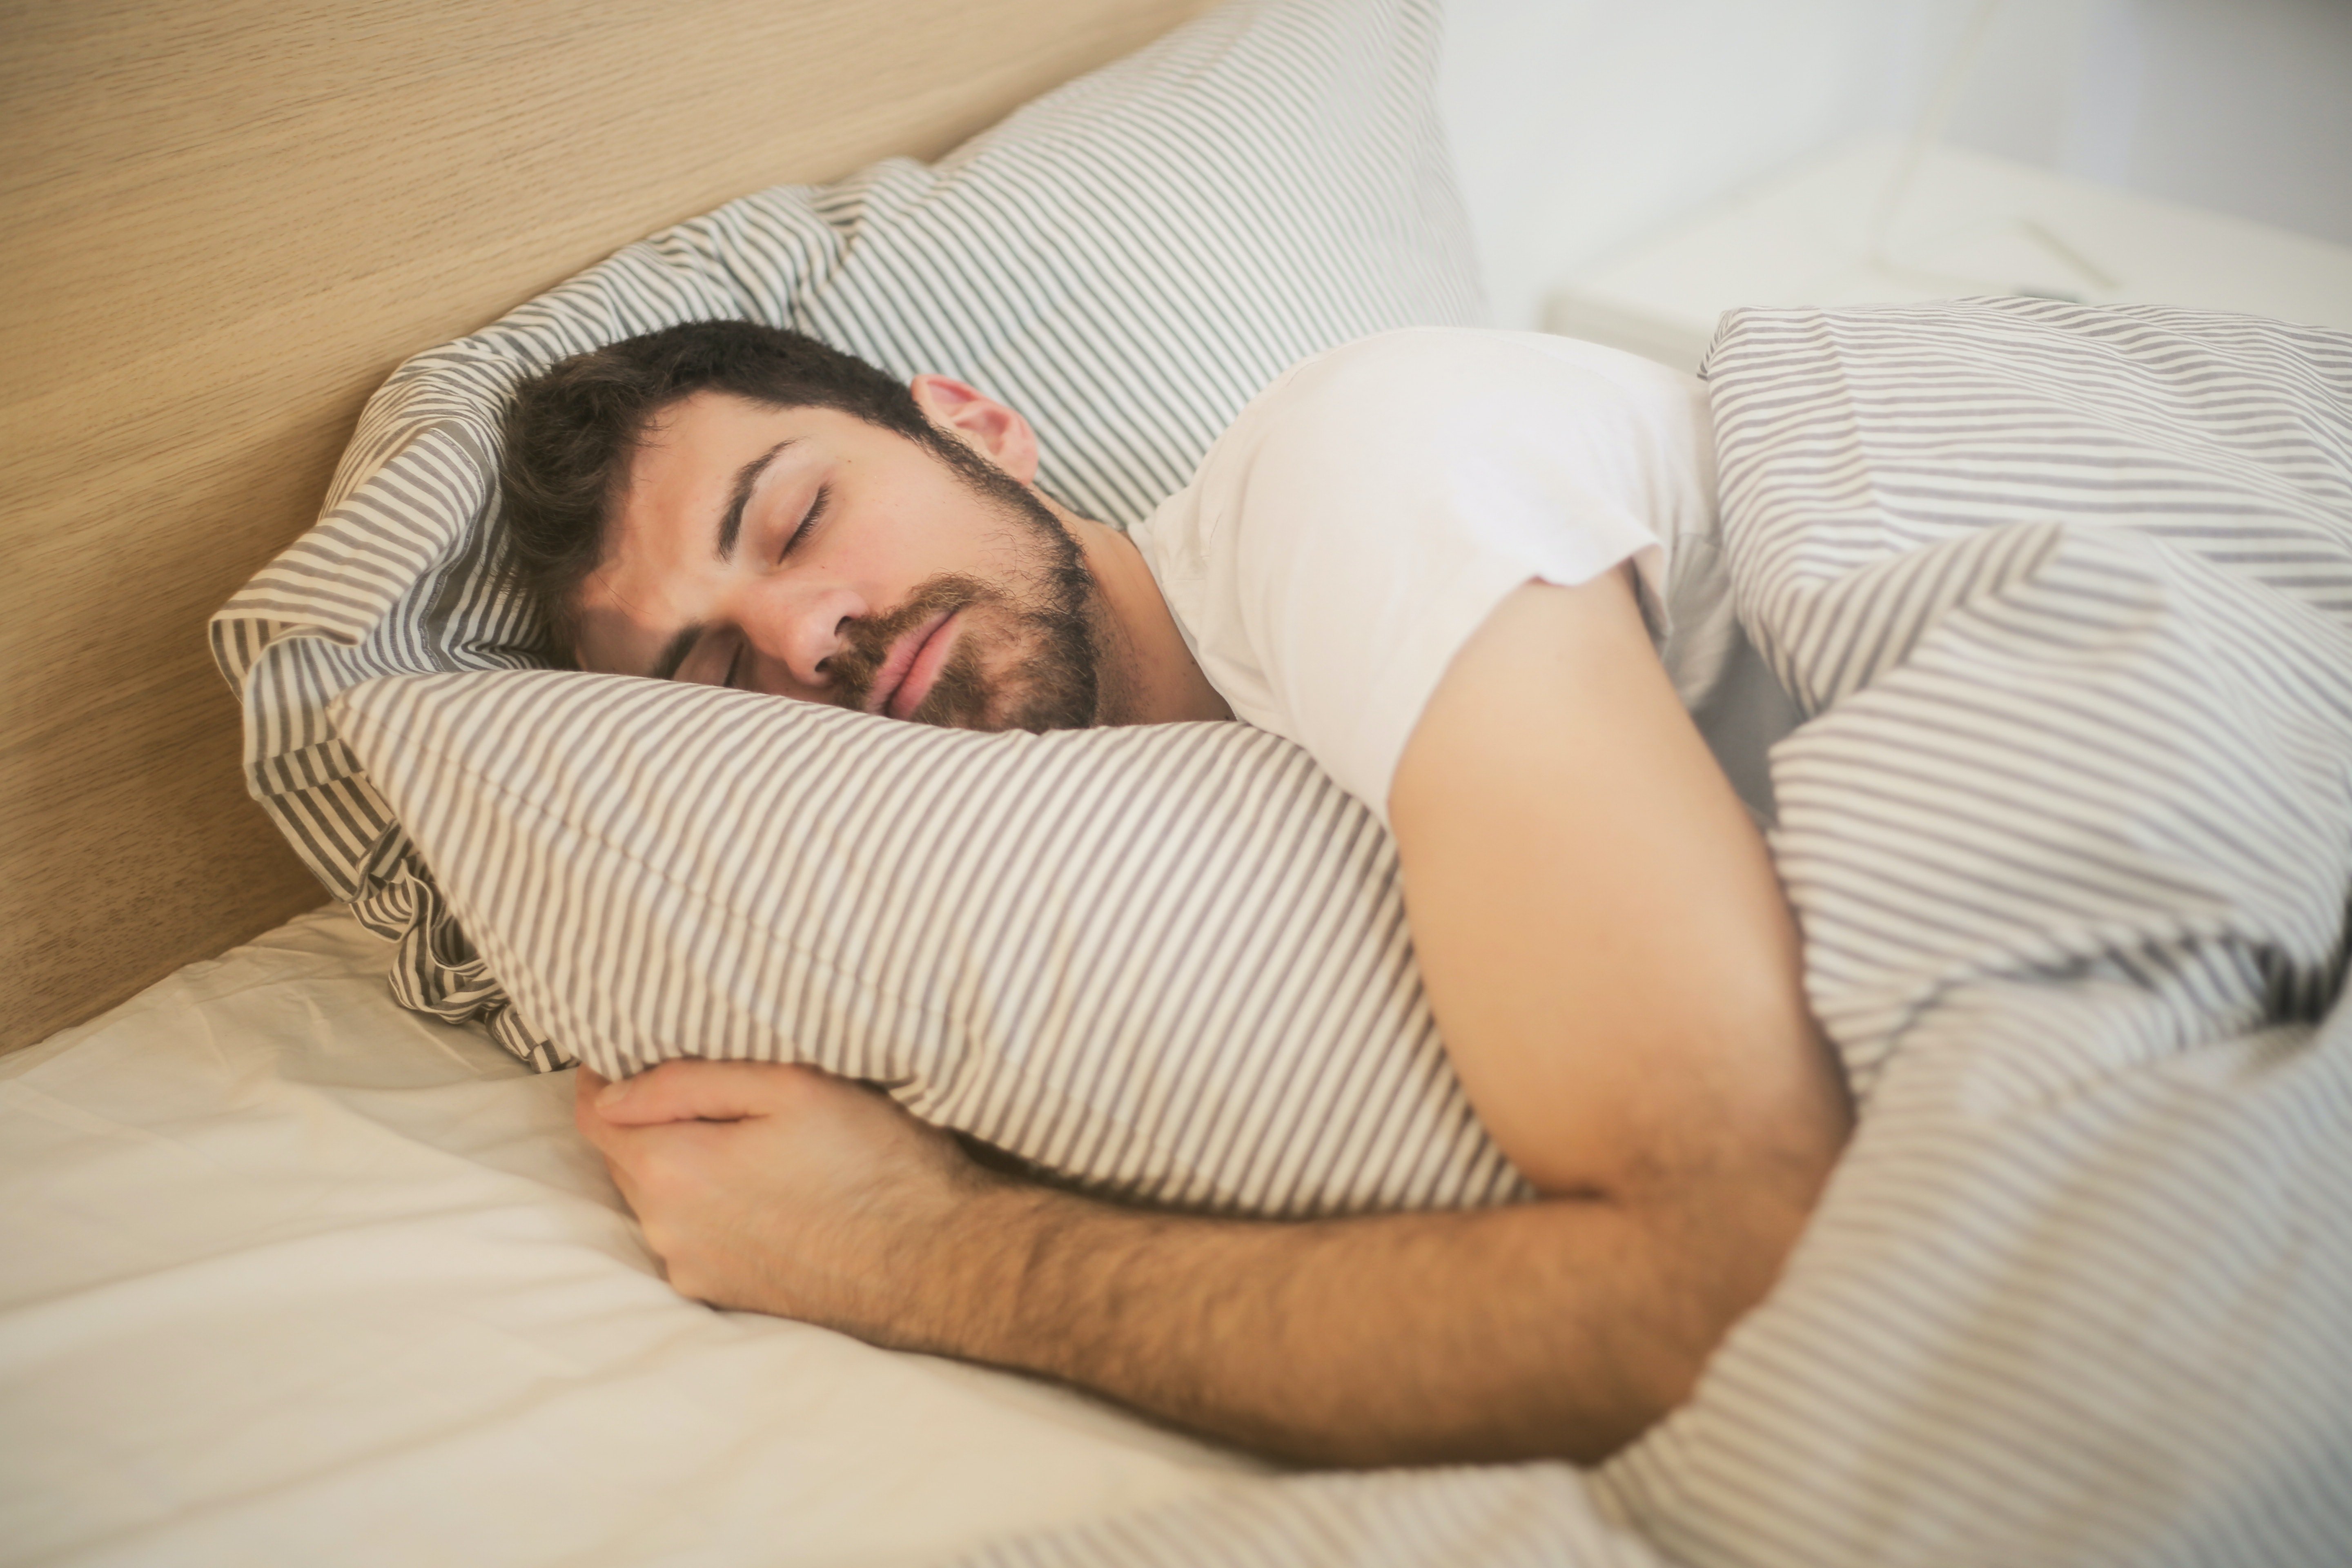 A man trying to get proper sleep | Source: Pexels